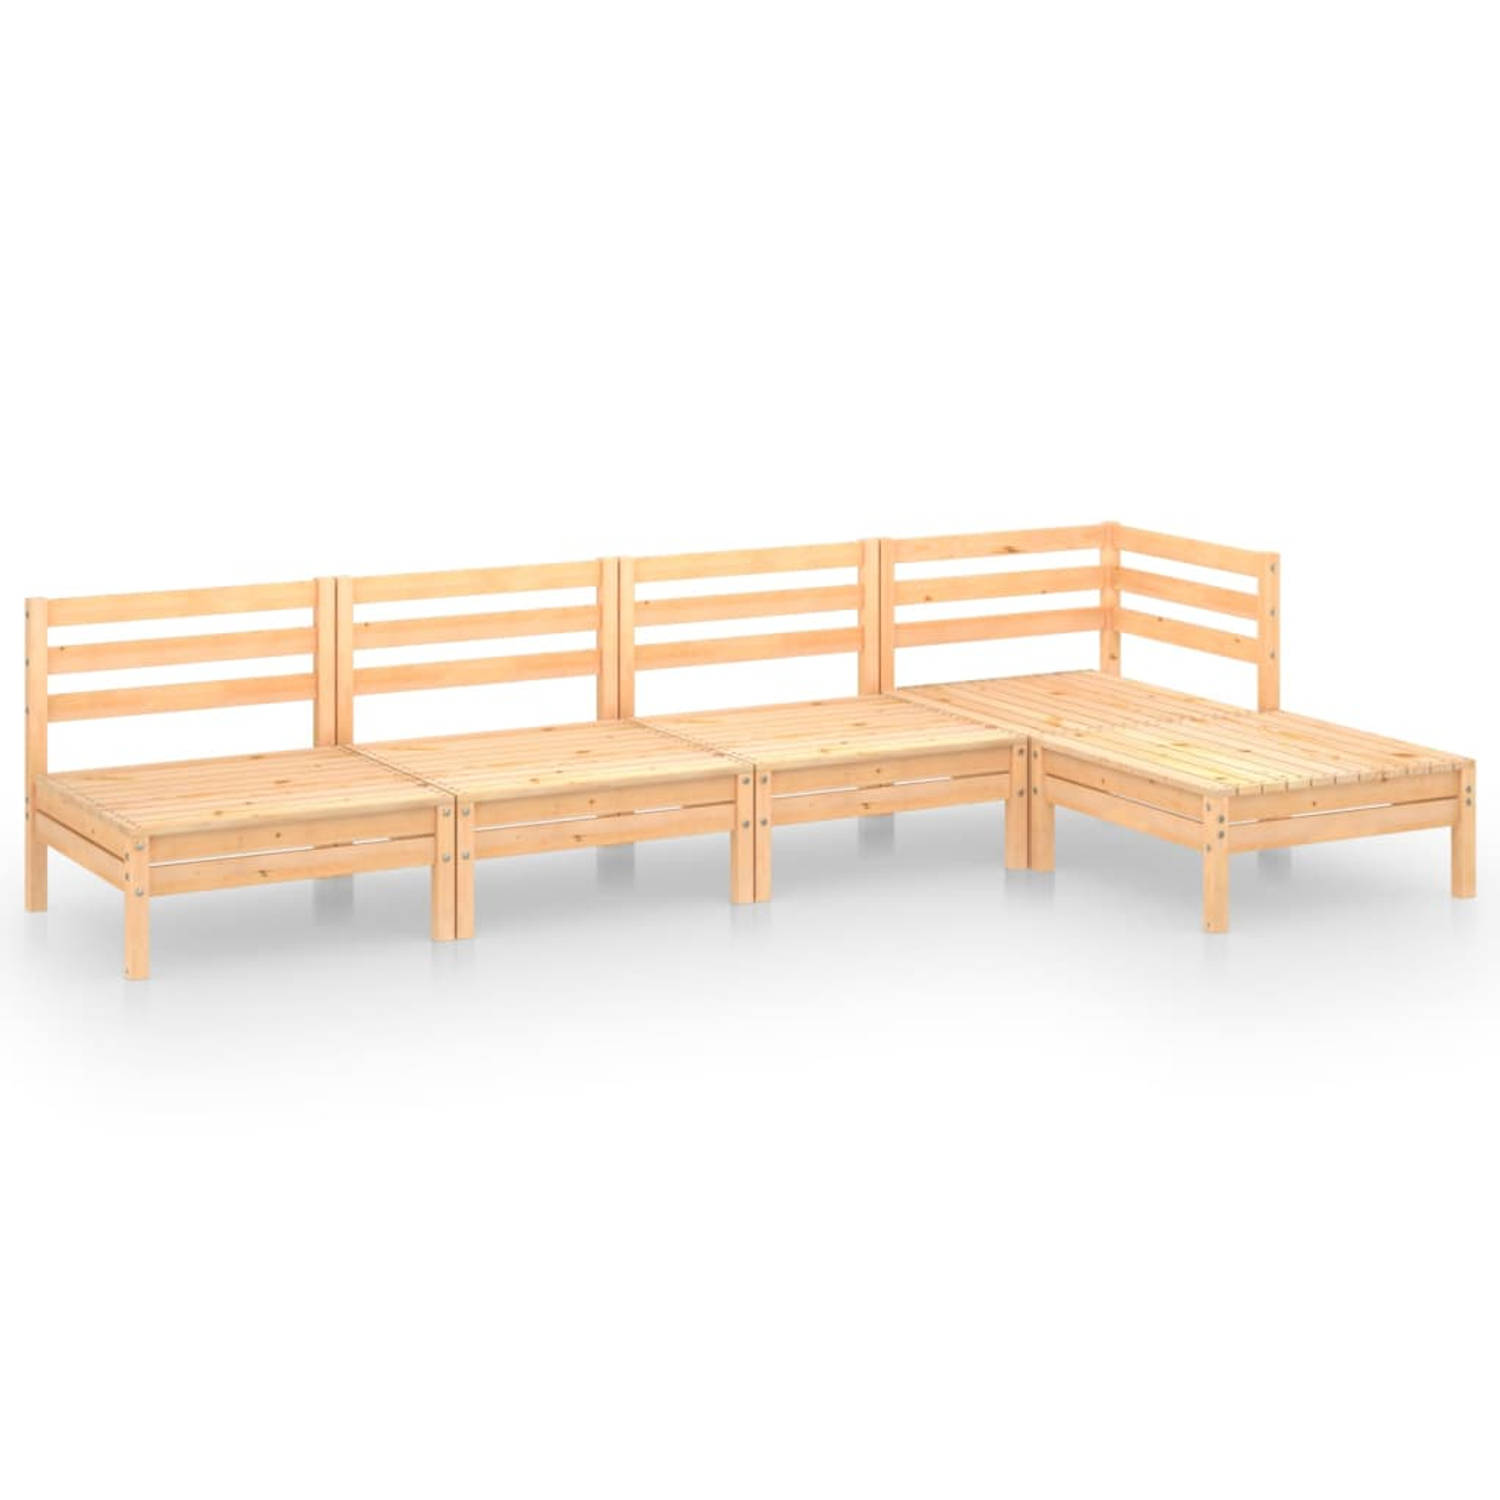 The Living Store Tuinset Pallet - Grenenhout - 63.5x63.5x62.5 cm - Modulair